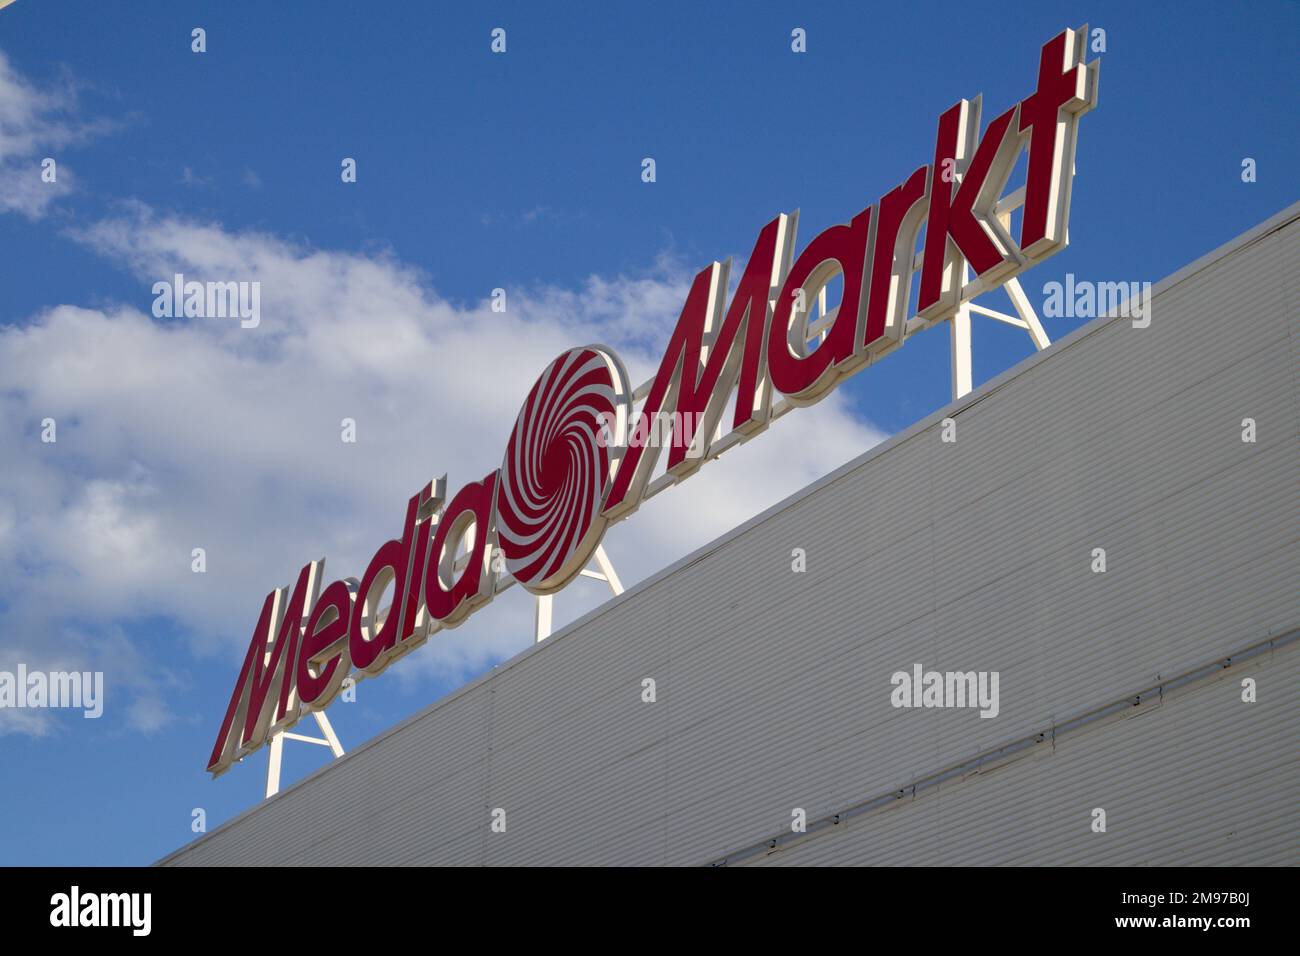 2022. Valencia, Spain. Logo with red letters of the Media Markt brand on one of its stores in Valencia (Spain) with blue sky and clouds behind Stock Photo